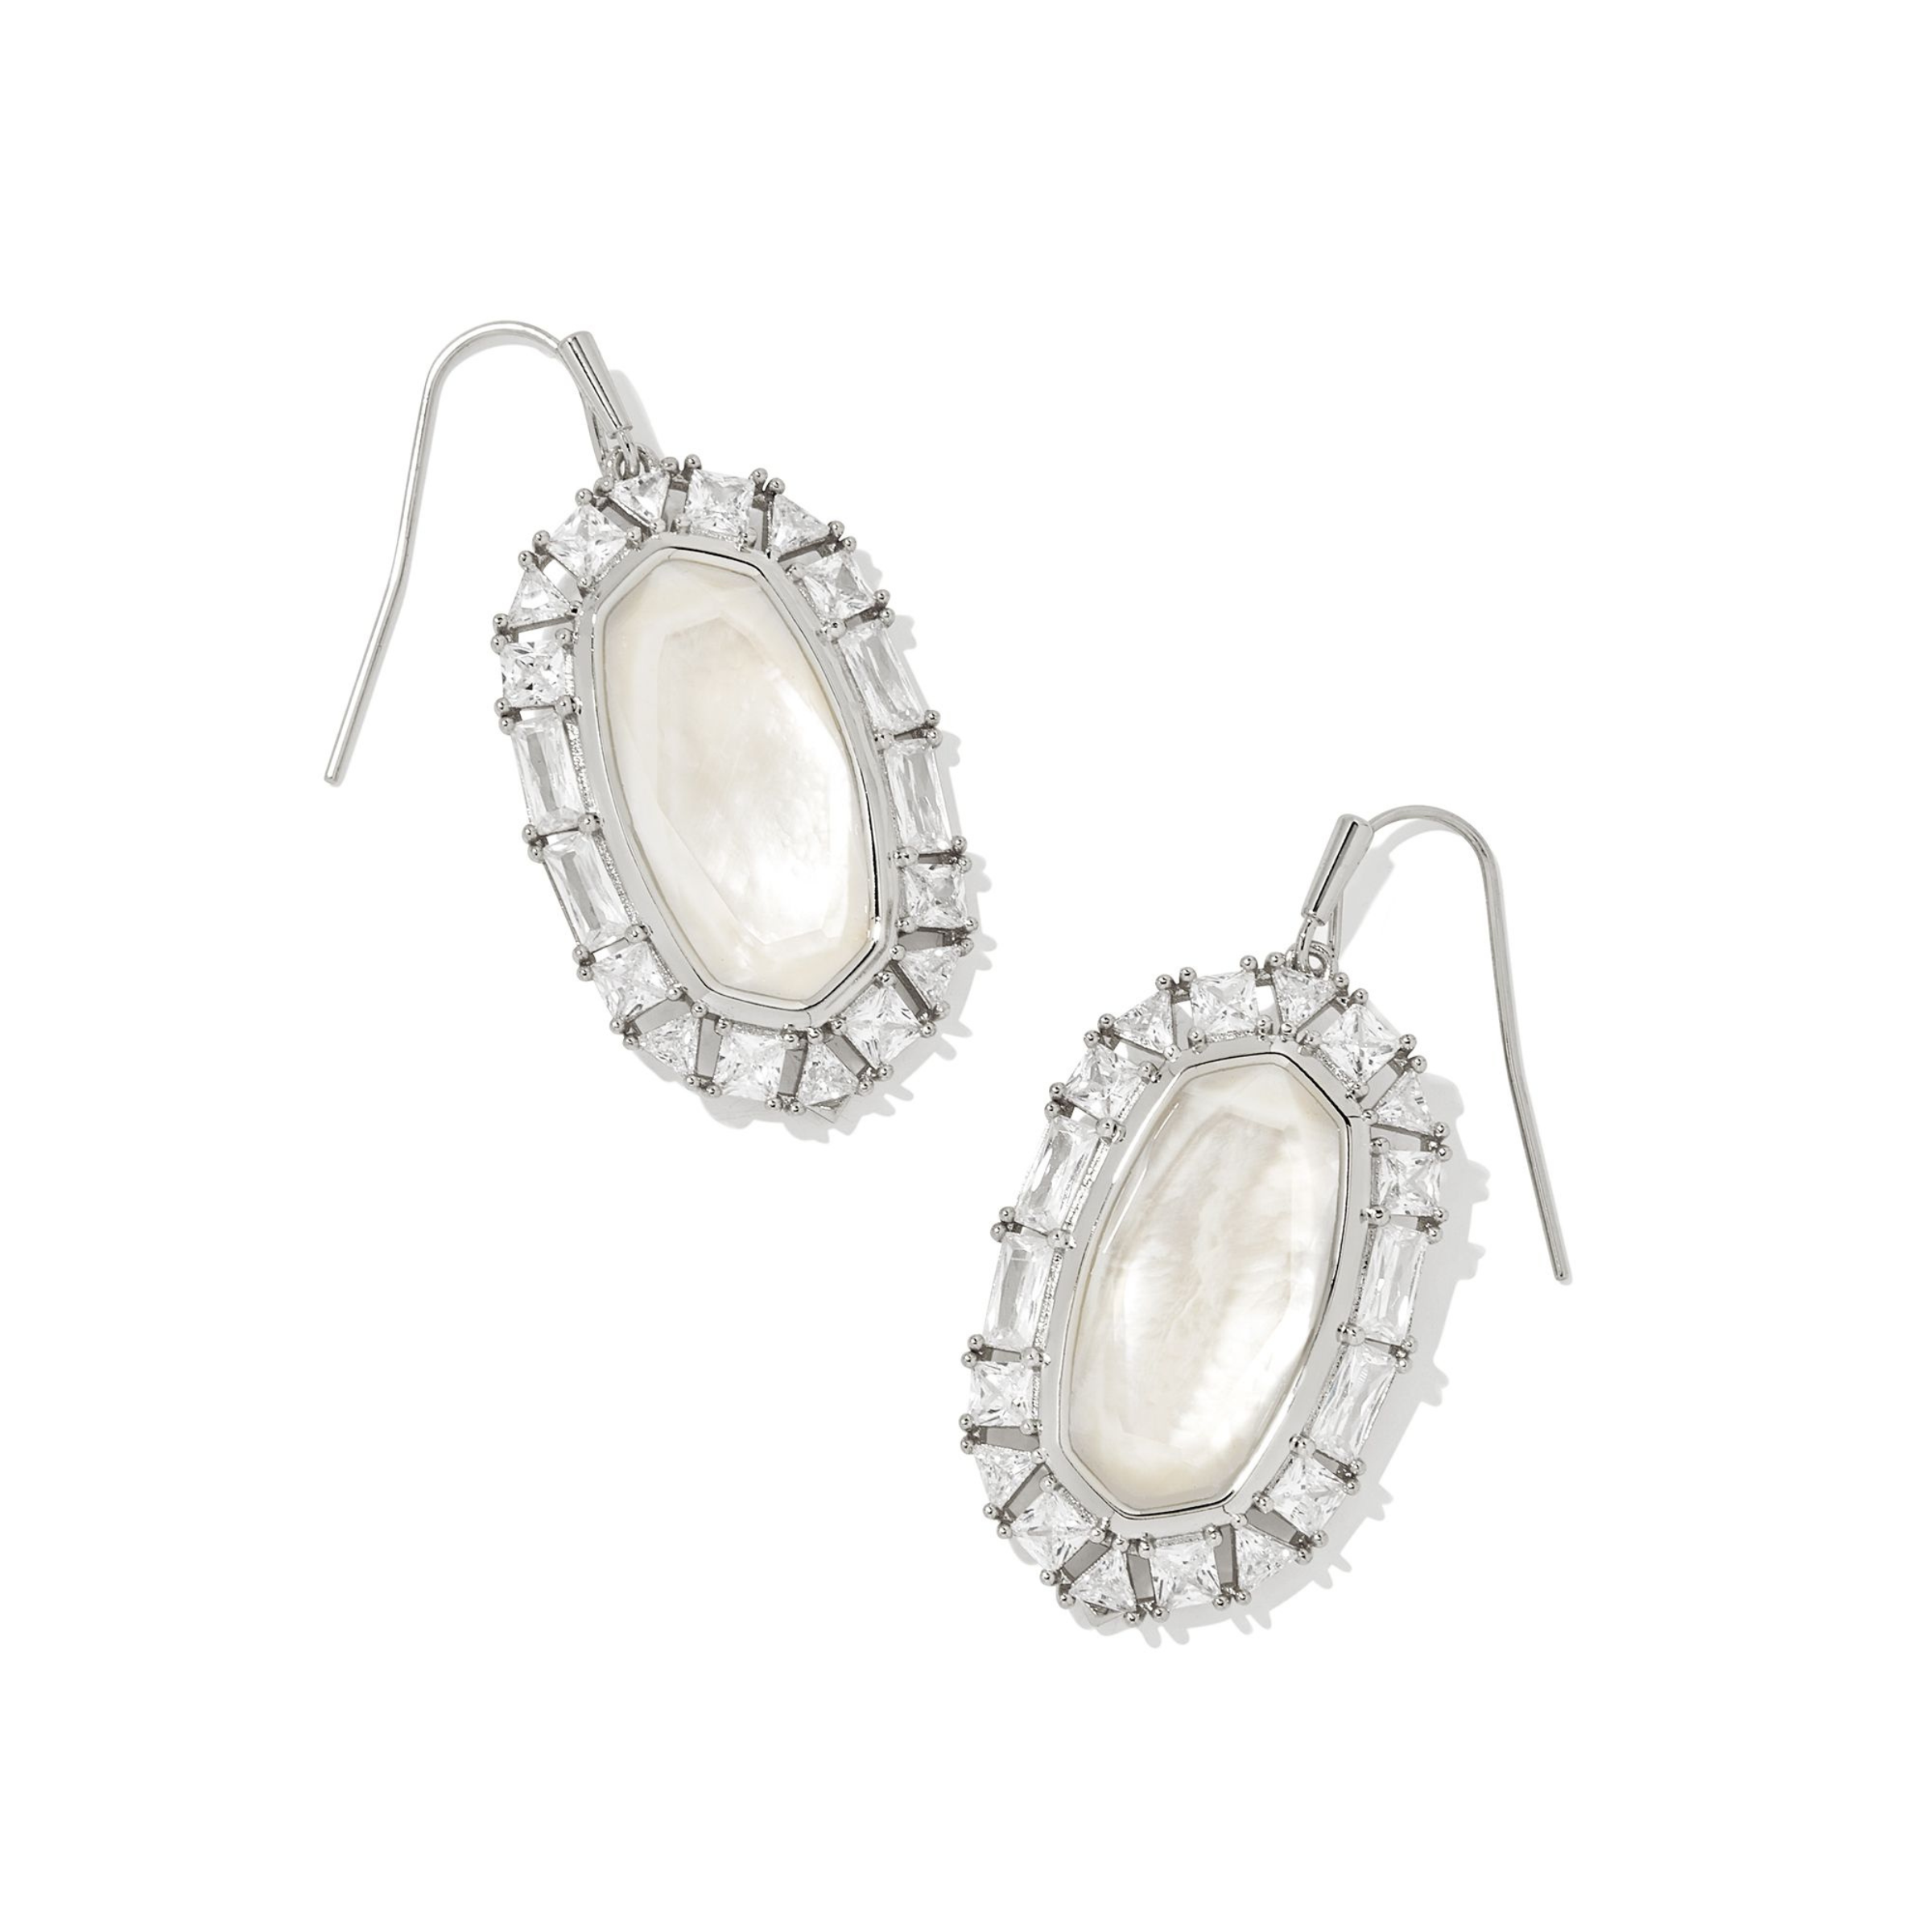 Silver, clear crystal frame drop earrings with ivory mother of pearl center stone pictured on a white background.